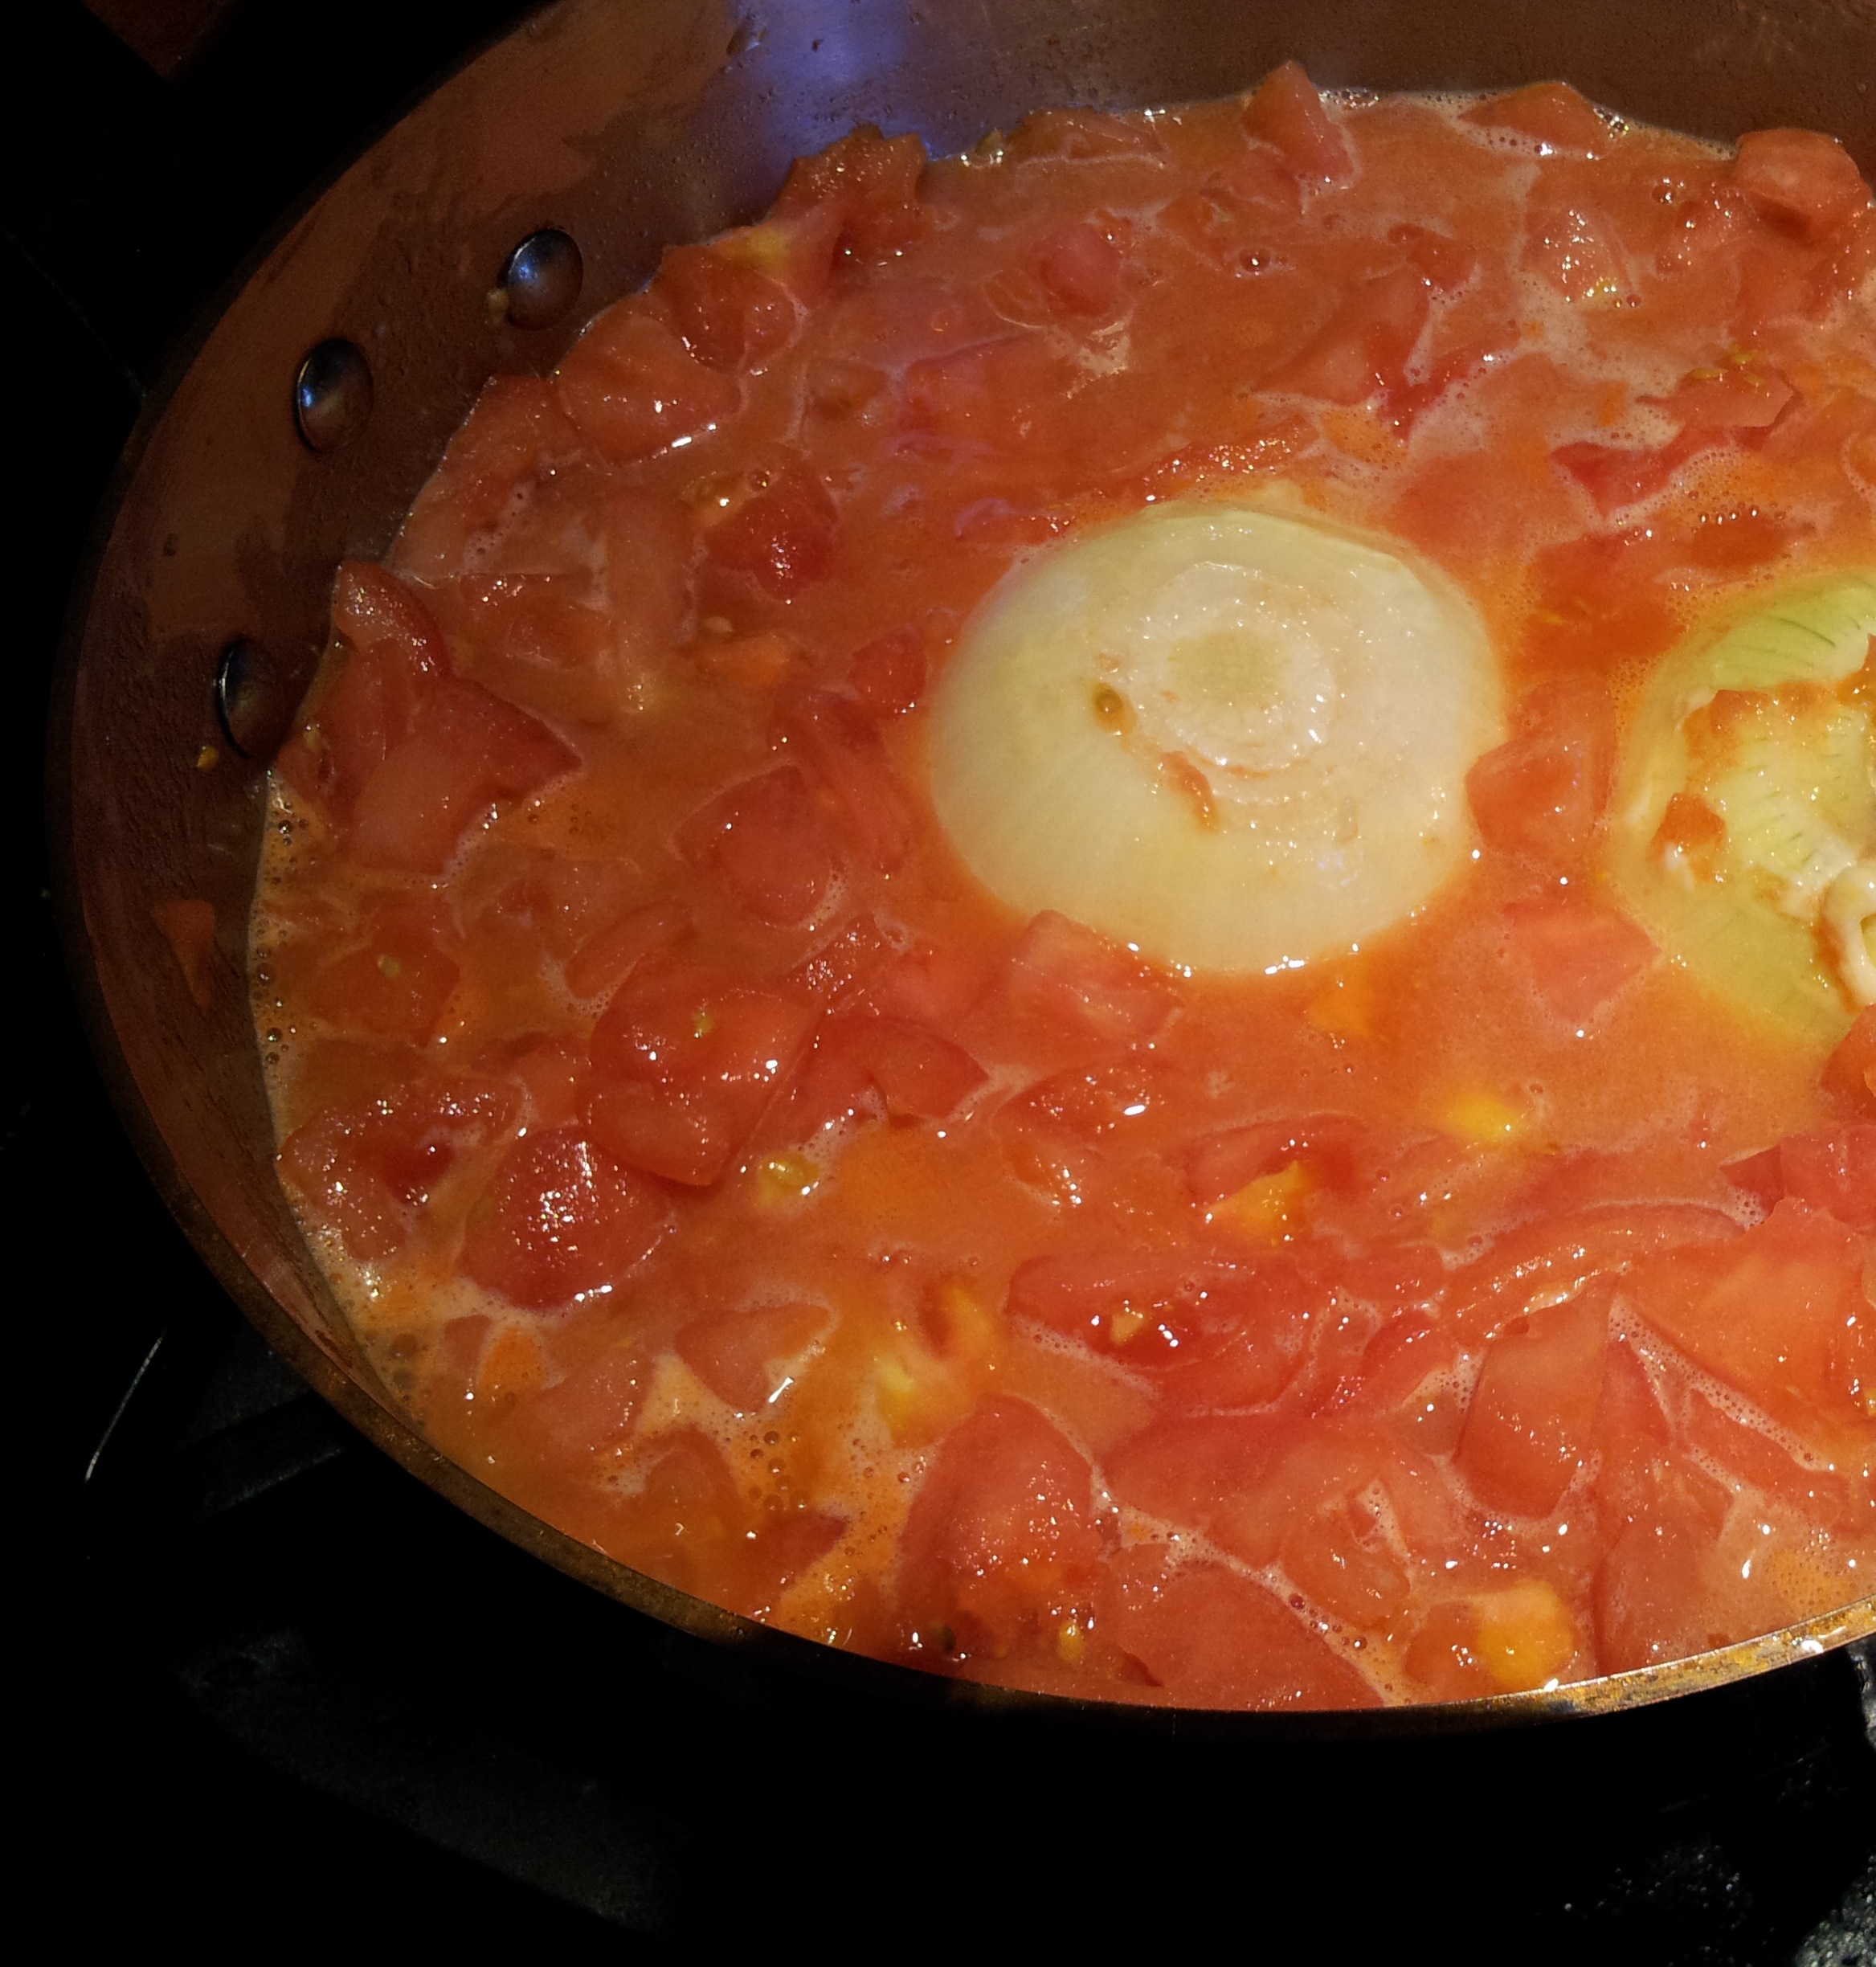 Putting the Ingredients for Butter Onion and Tomato Sauce Into Copper Pot